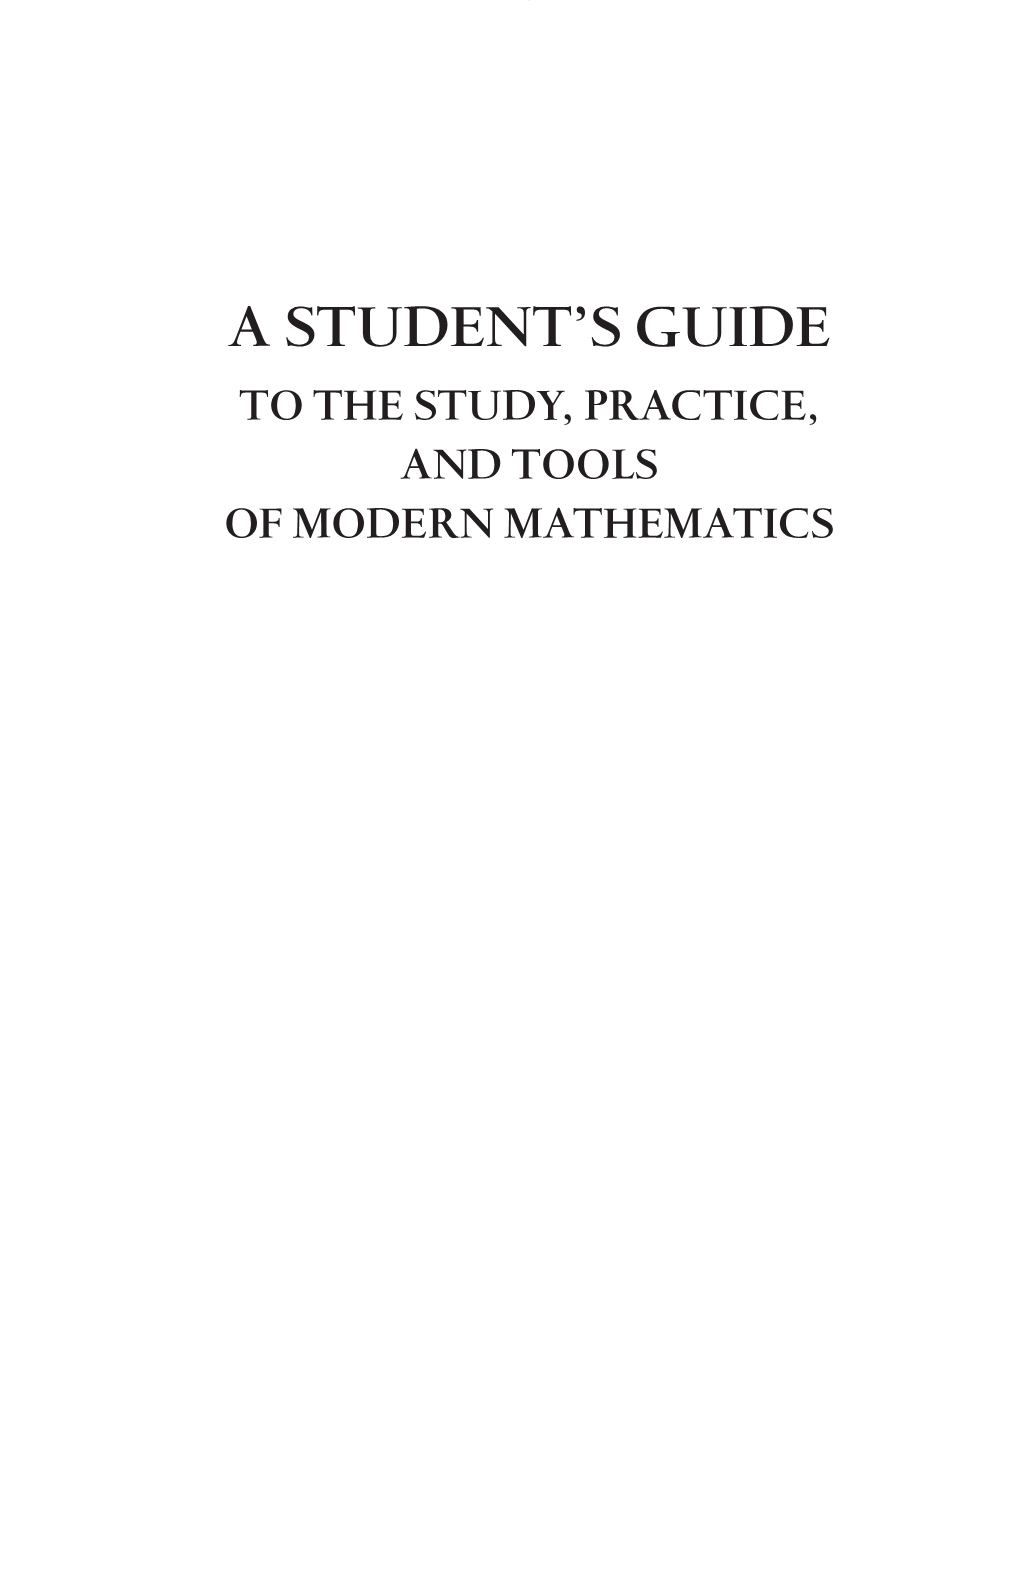 A Student's Guide: to the Study, Practice, and Tools of Modern